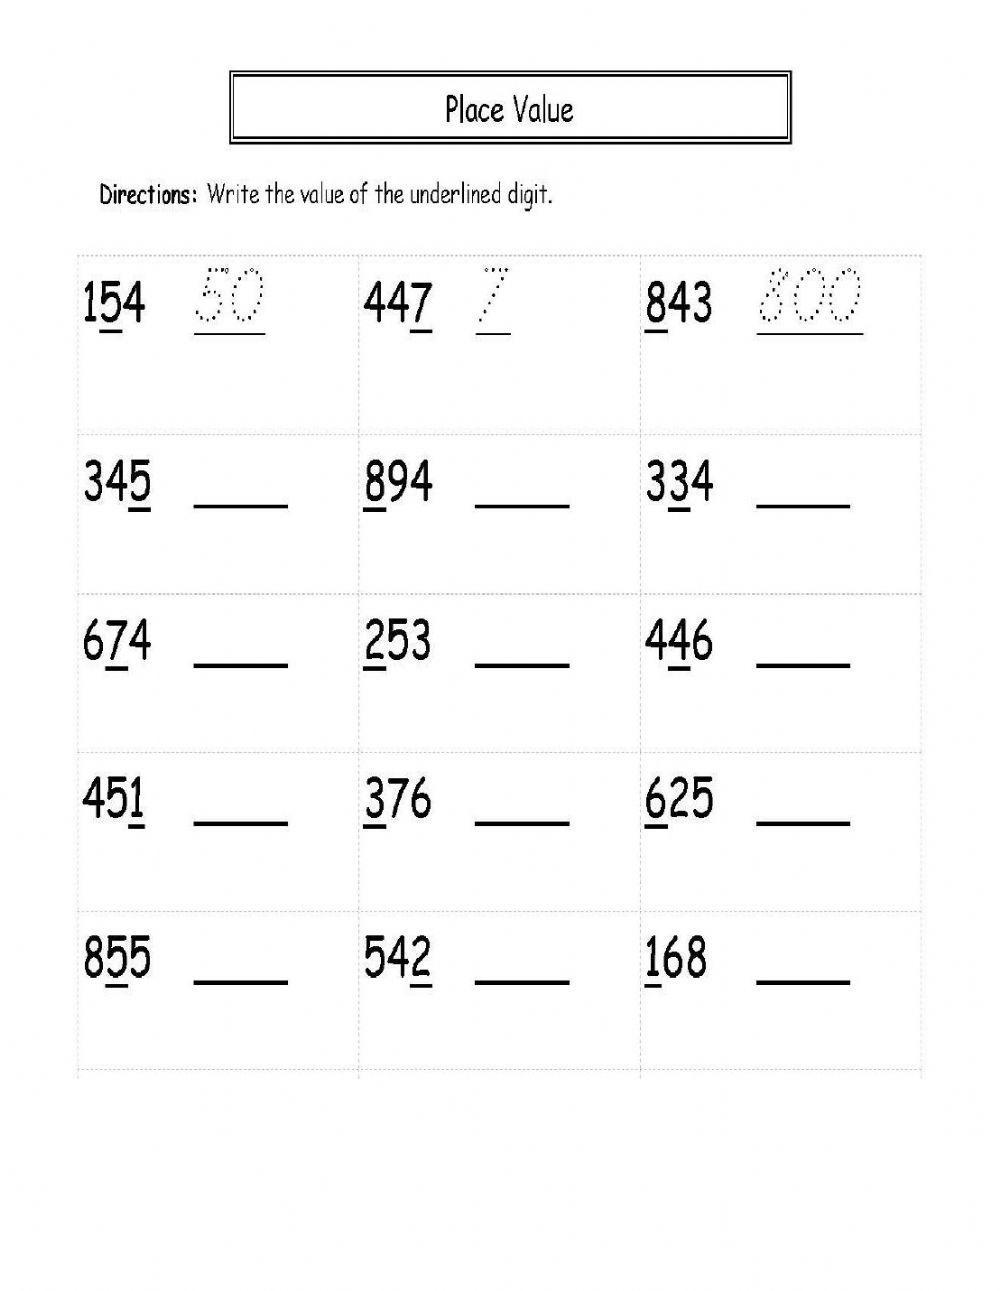 Place Value (Hundreds, Tens and Ones)